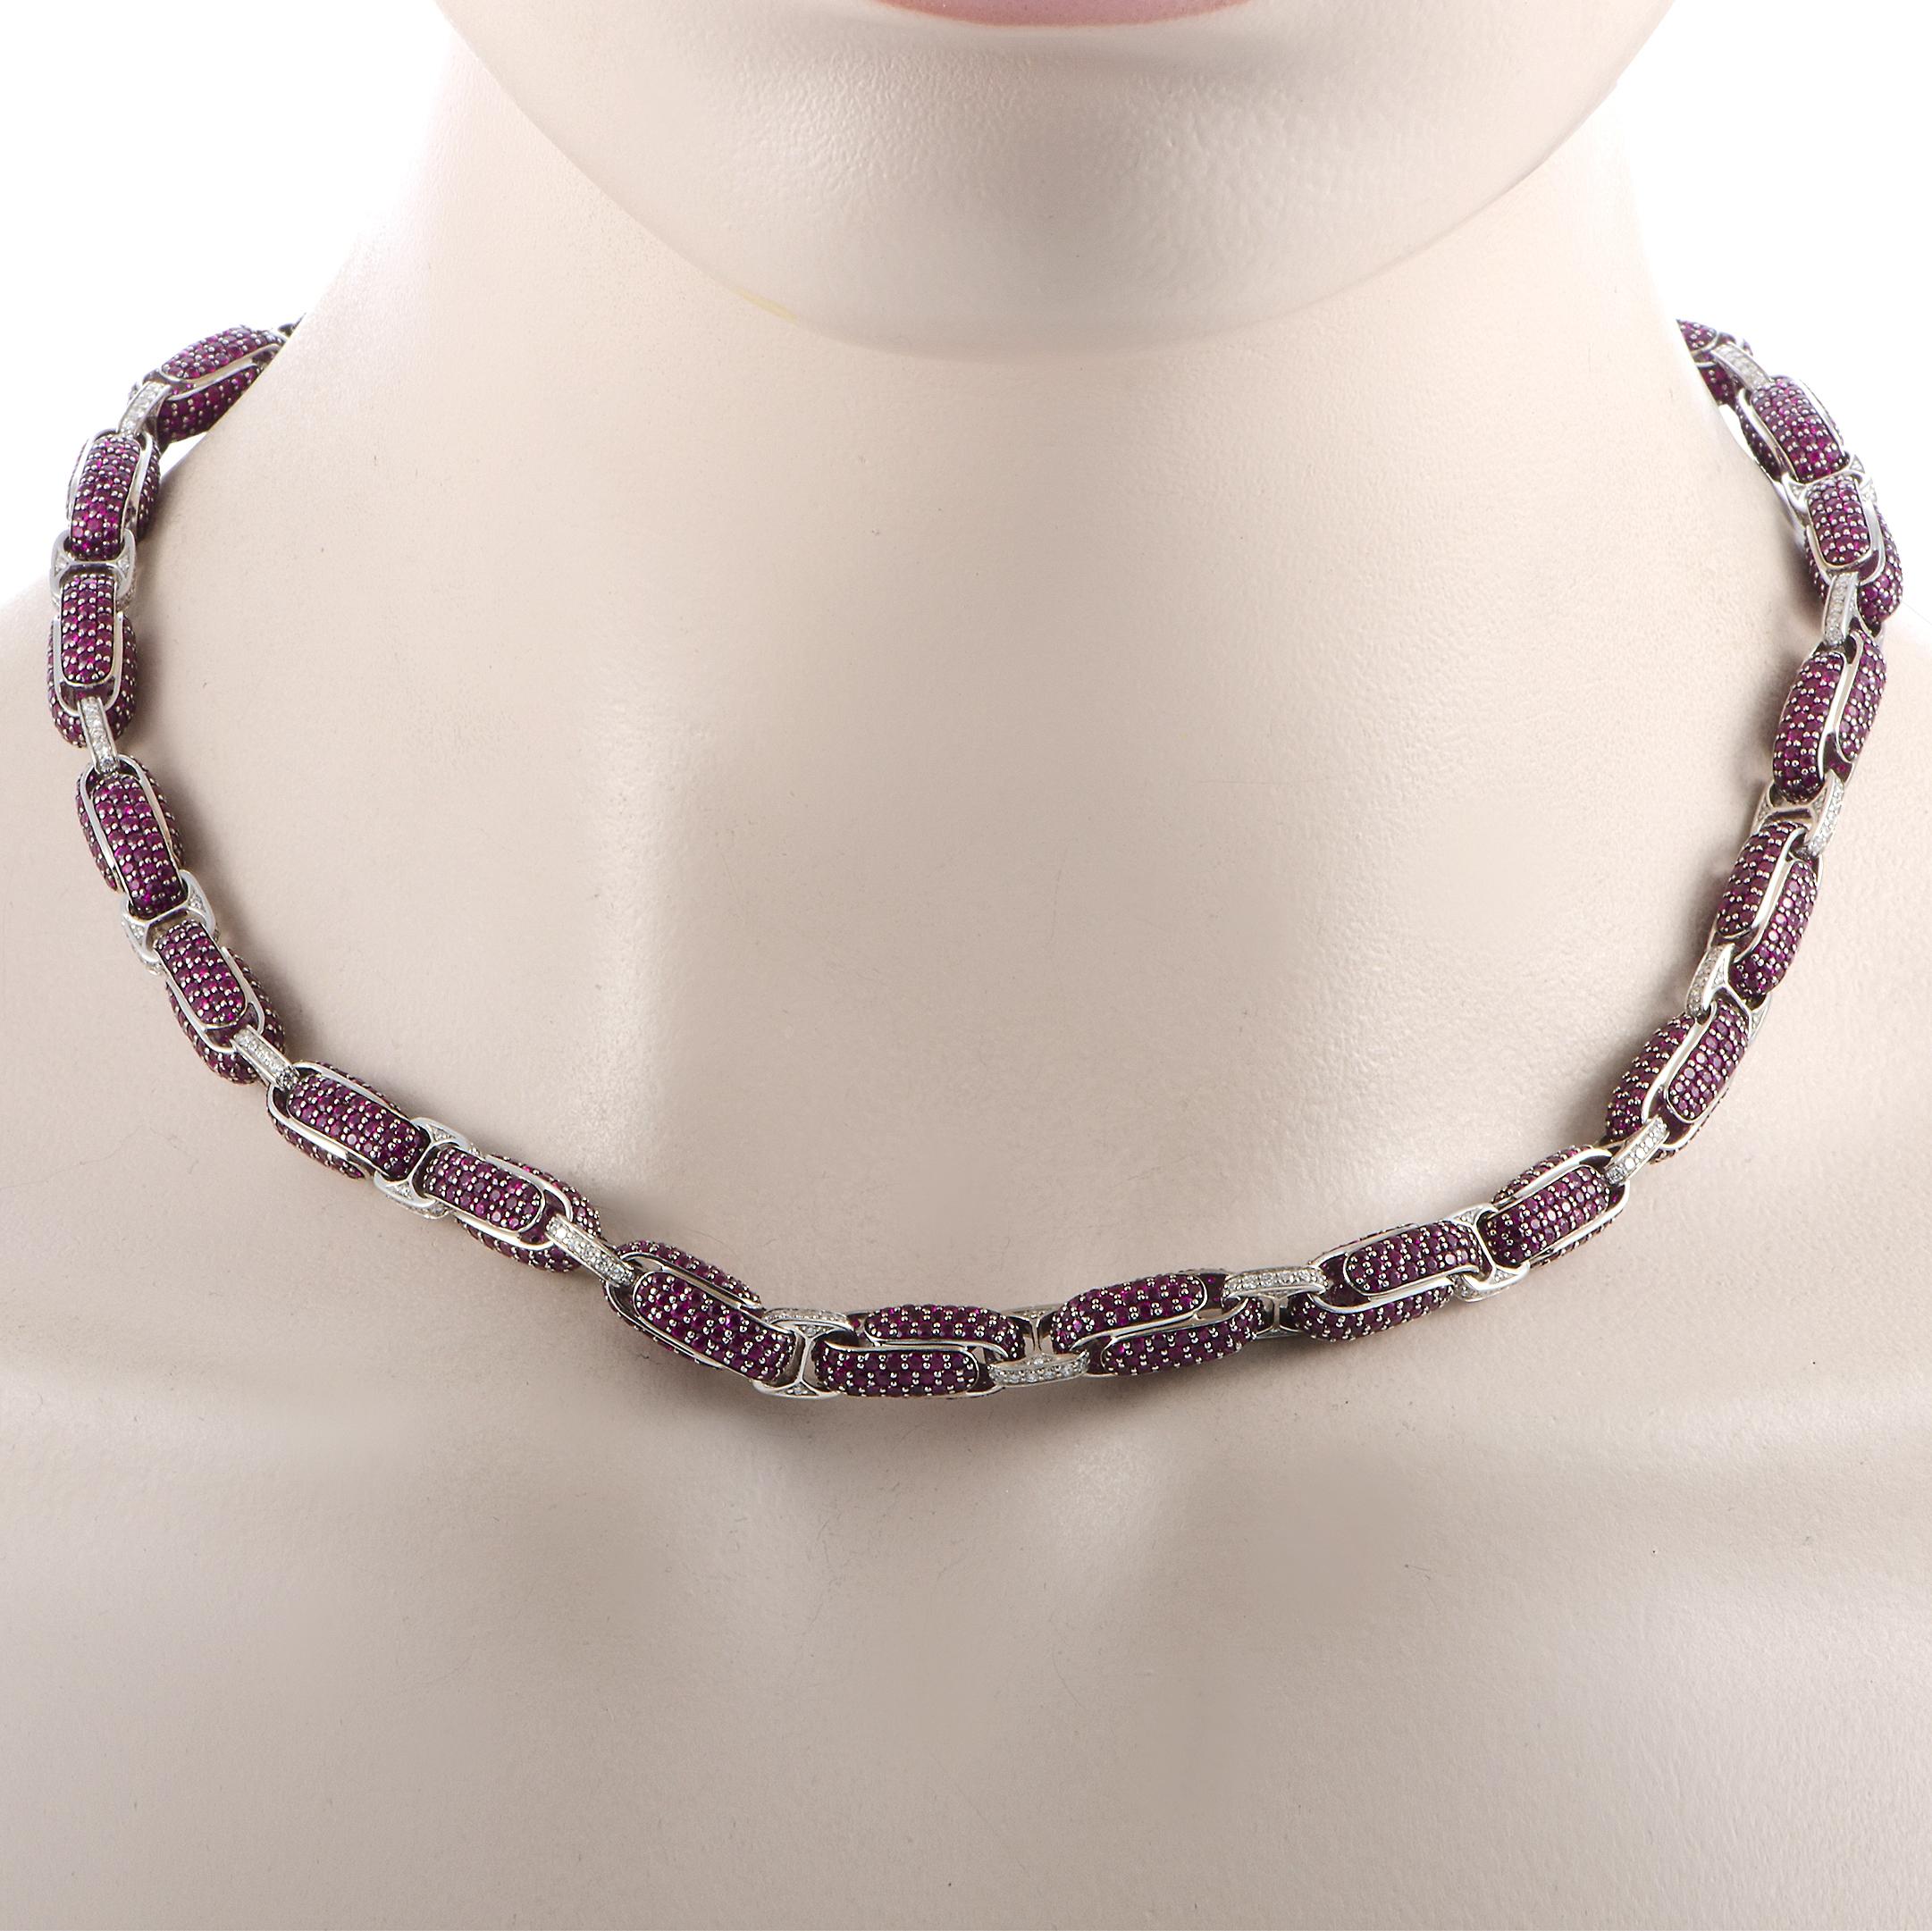 The Roberto Coin “Fantasia” necklace is crafted from 18K white gold and weighs 70 grams. It is set with diamonds and rubies that total 3.75 and 40.00 carats respectively. The necklace features a fold over clasp and measures 19” in length.

This